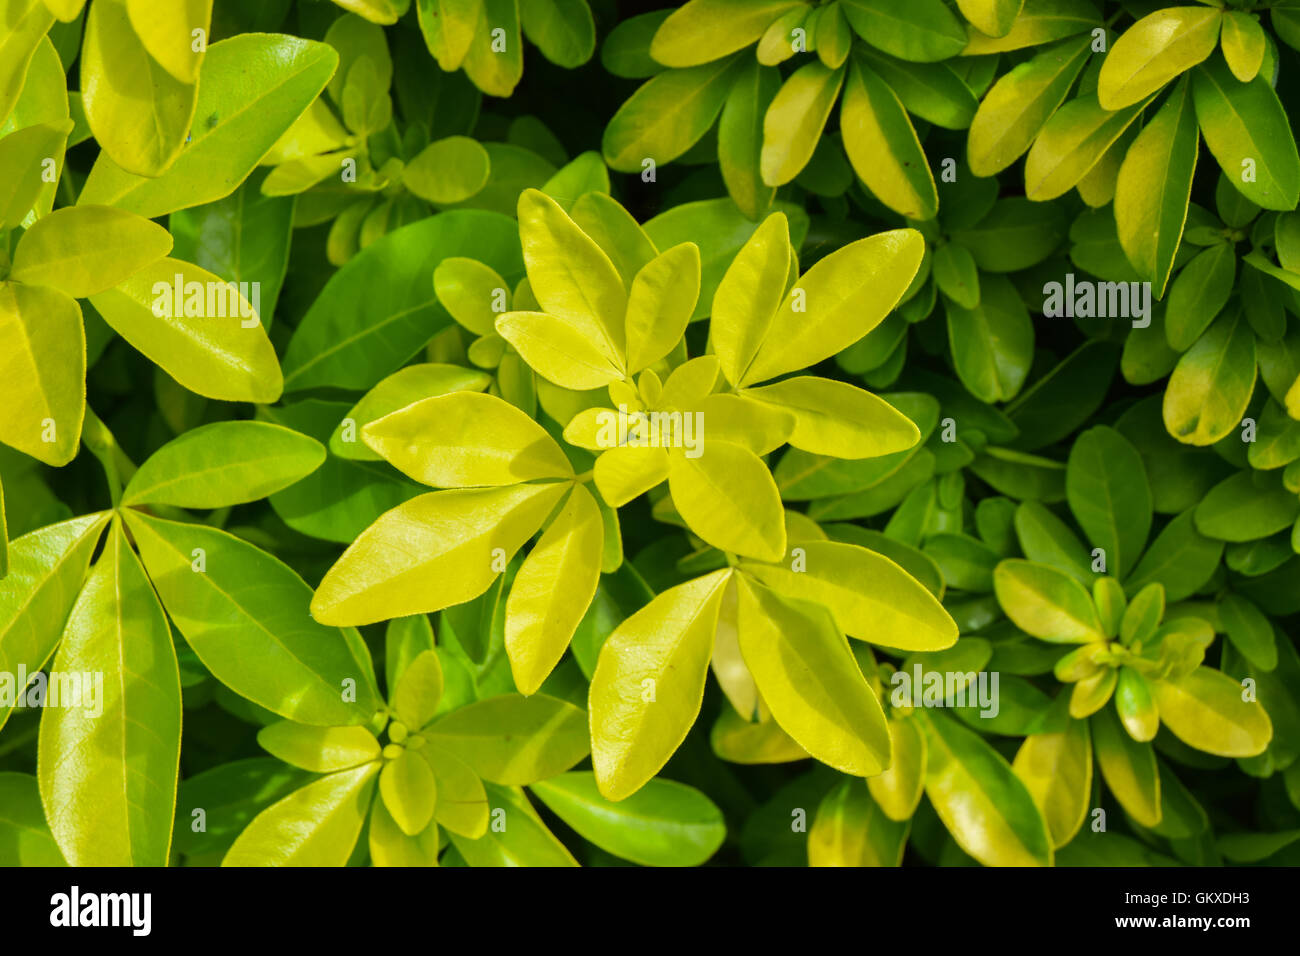 Waxy green leaves from a bush in the garden in contrast light, close up Stock Photo